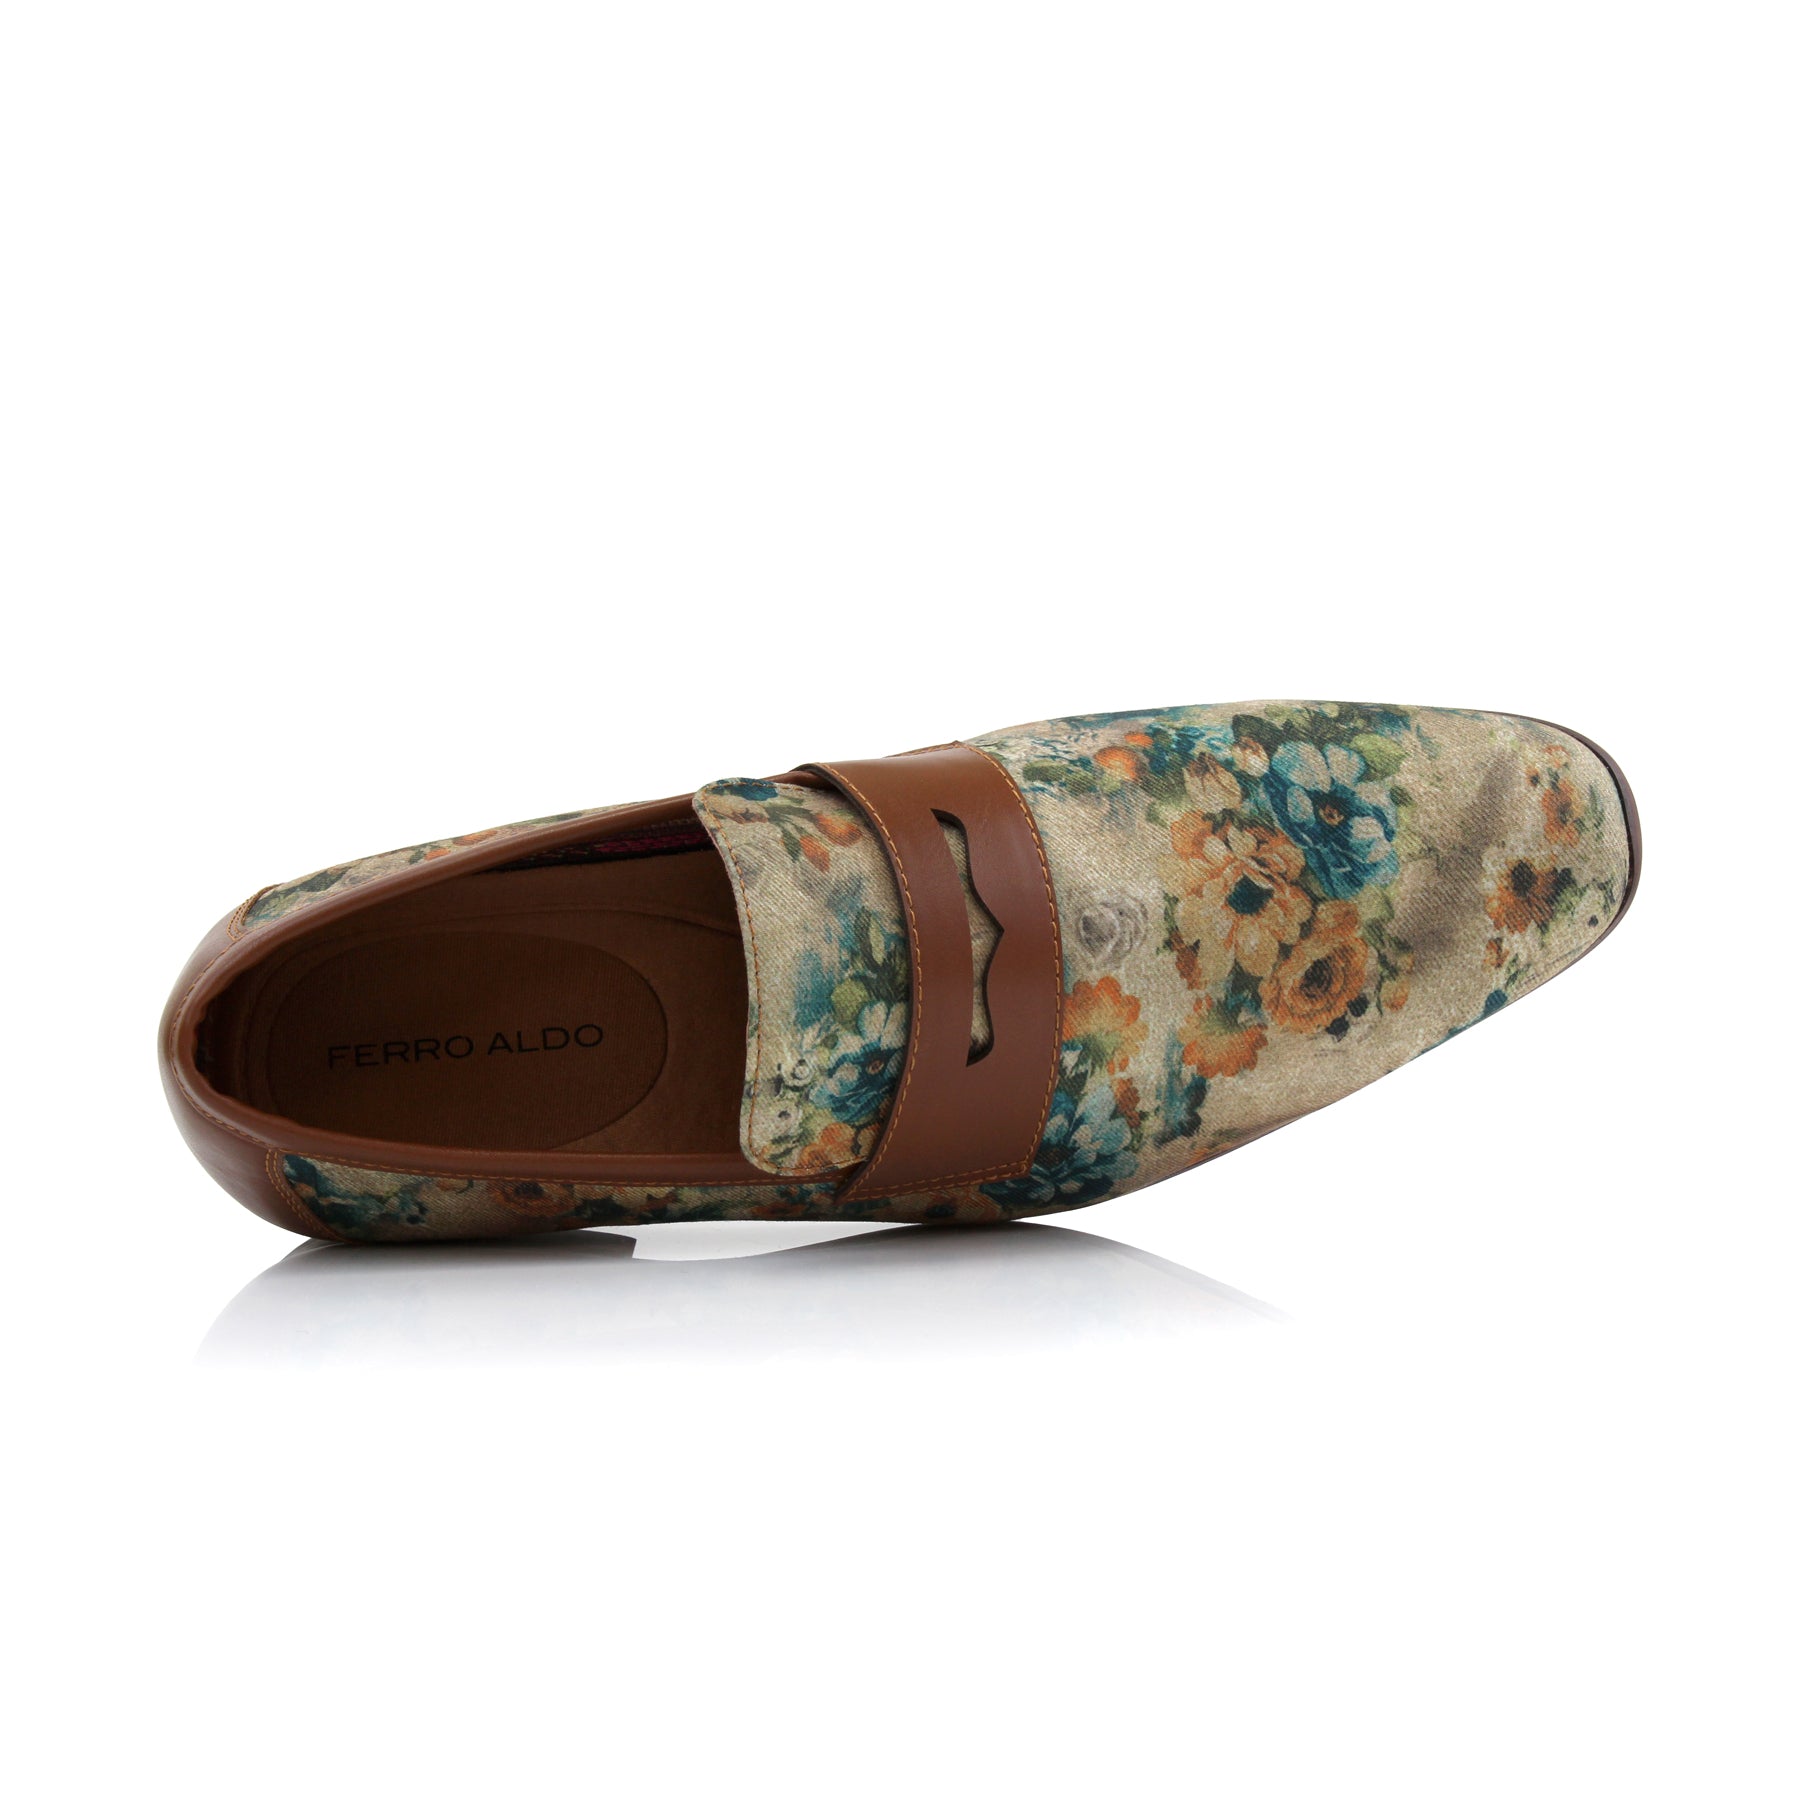 Floral Loafers | Sidney by Ferro Aldo | Conal Footwear | Top-Down Angle View